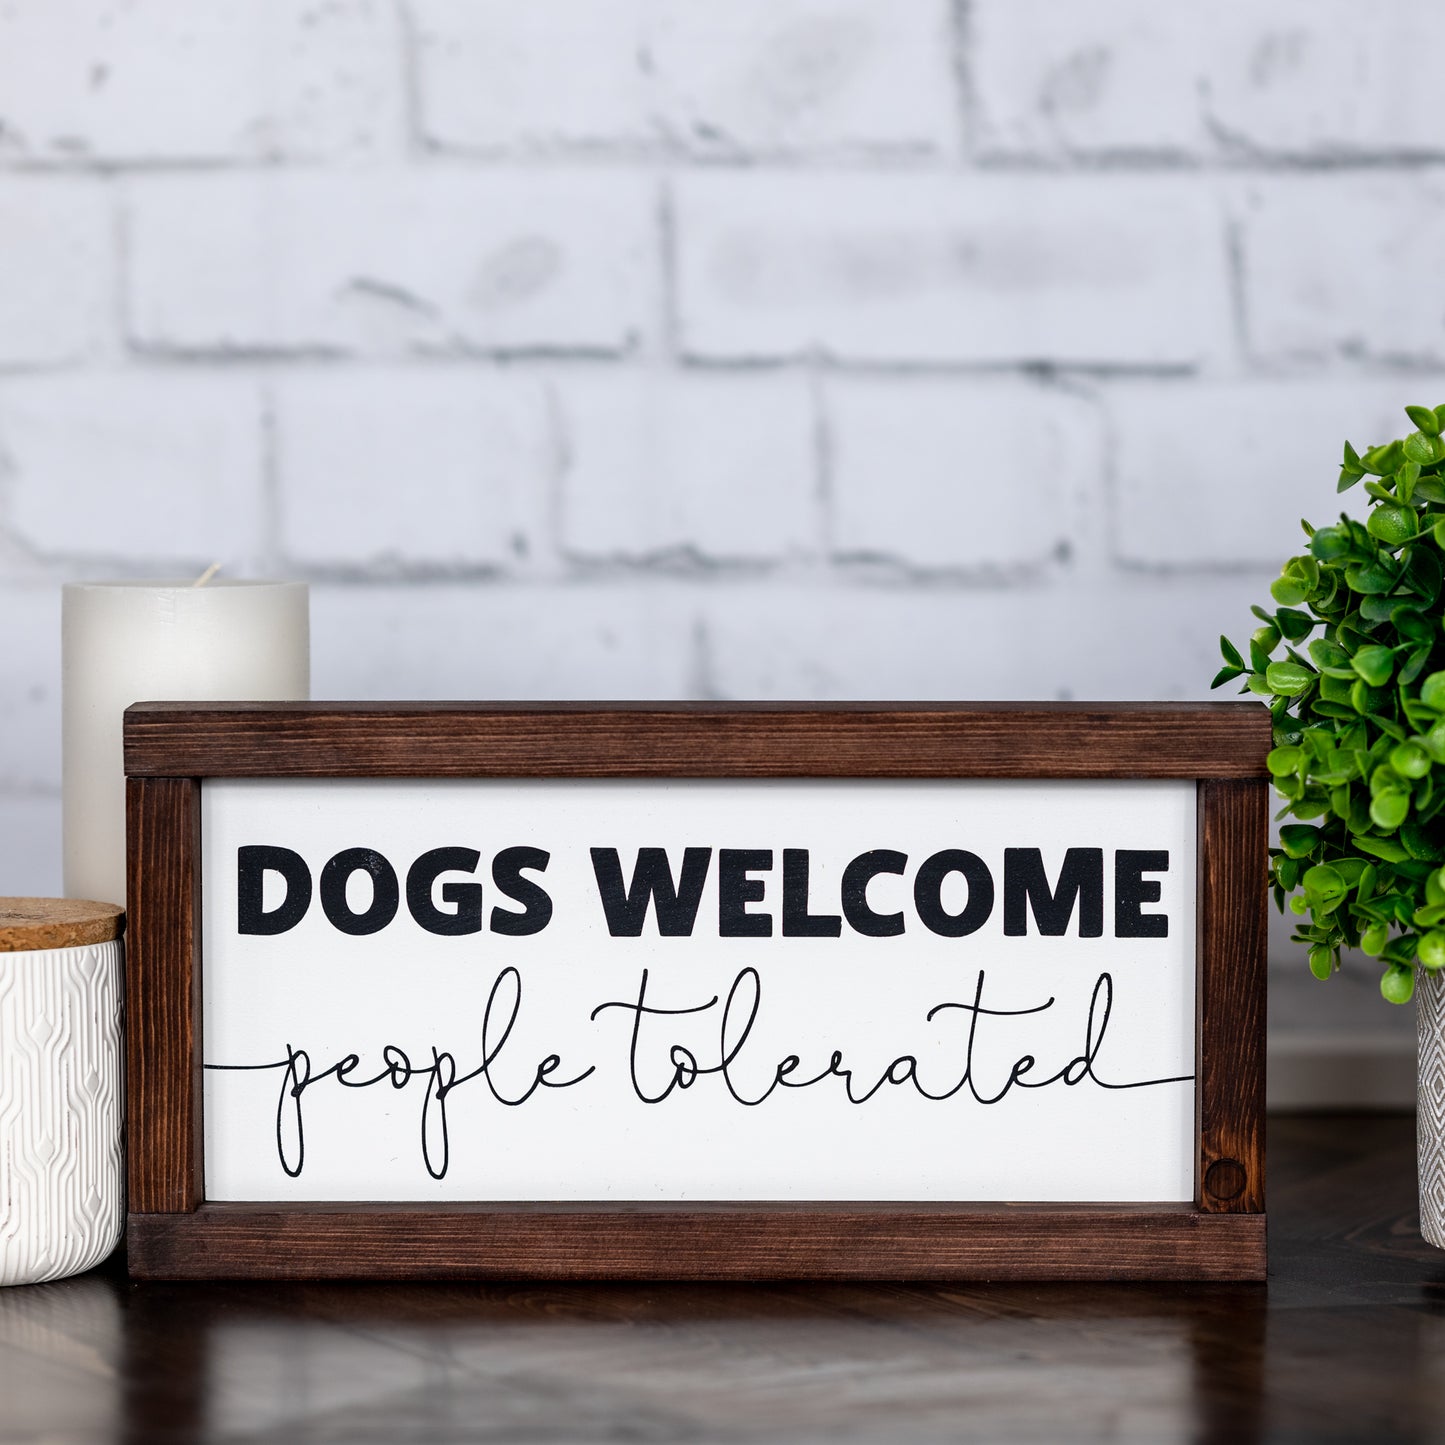 dogs welcome people tolerated ~ wood sign